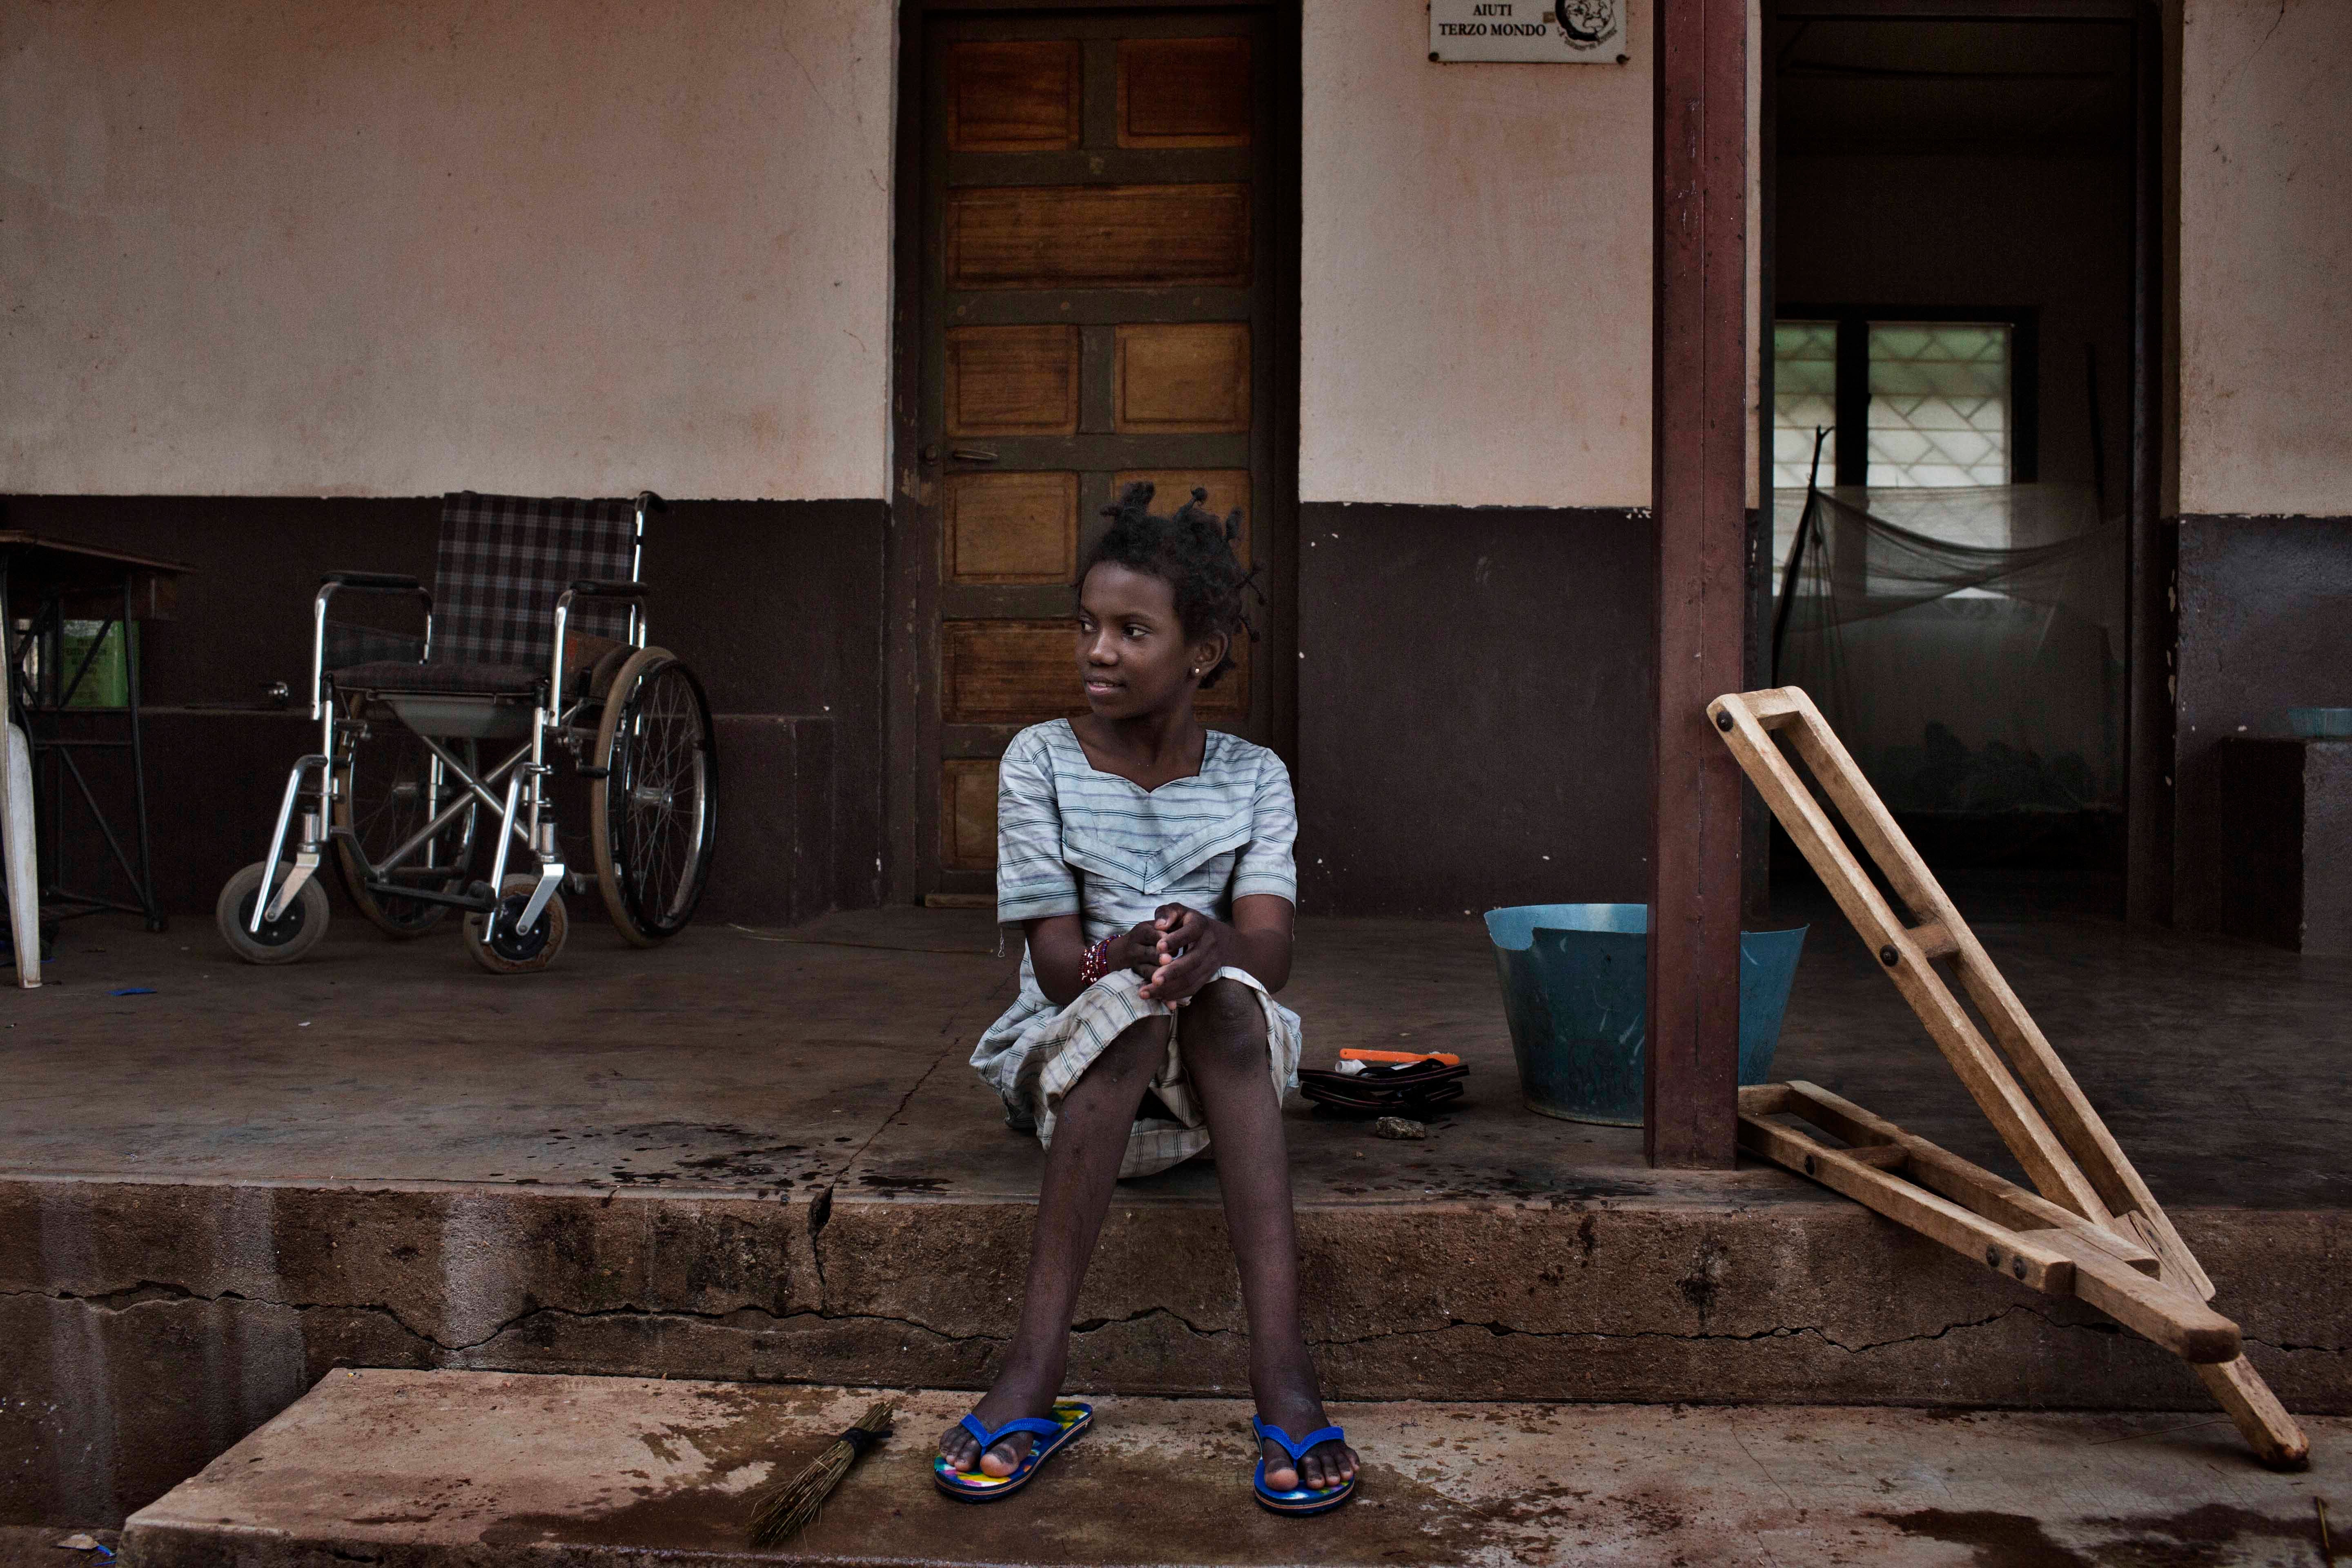 Hamamatou, a 13-year-old girl who had polio, in front of a Catholic mission where she lived in 2015.